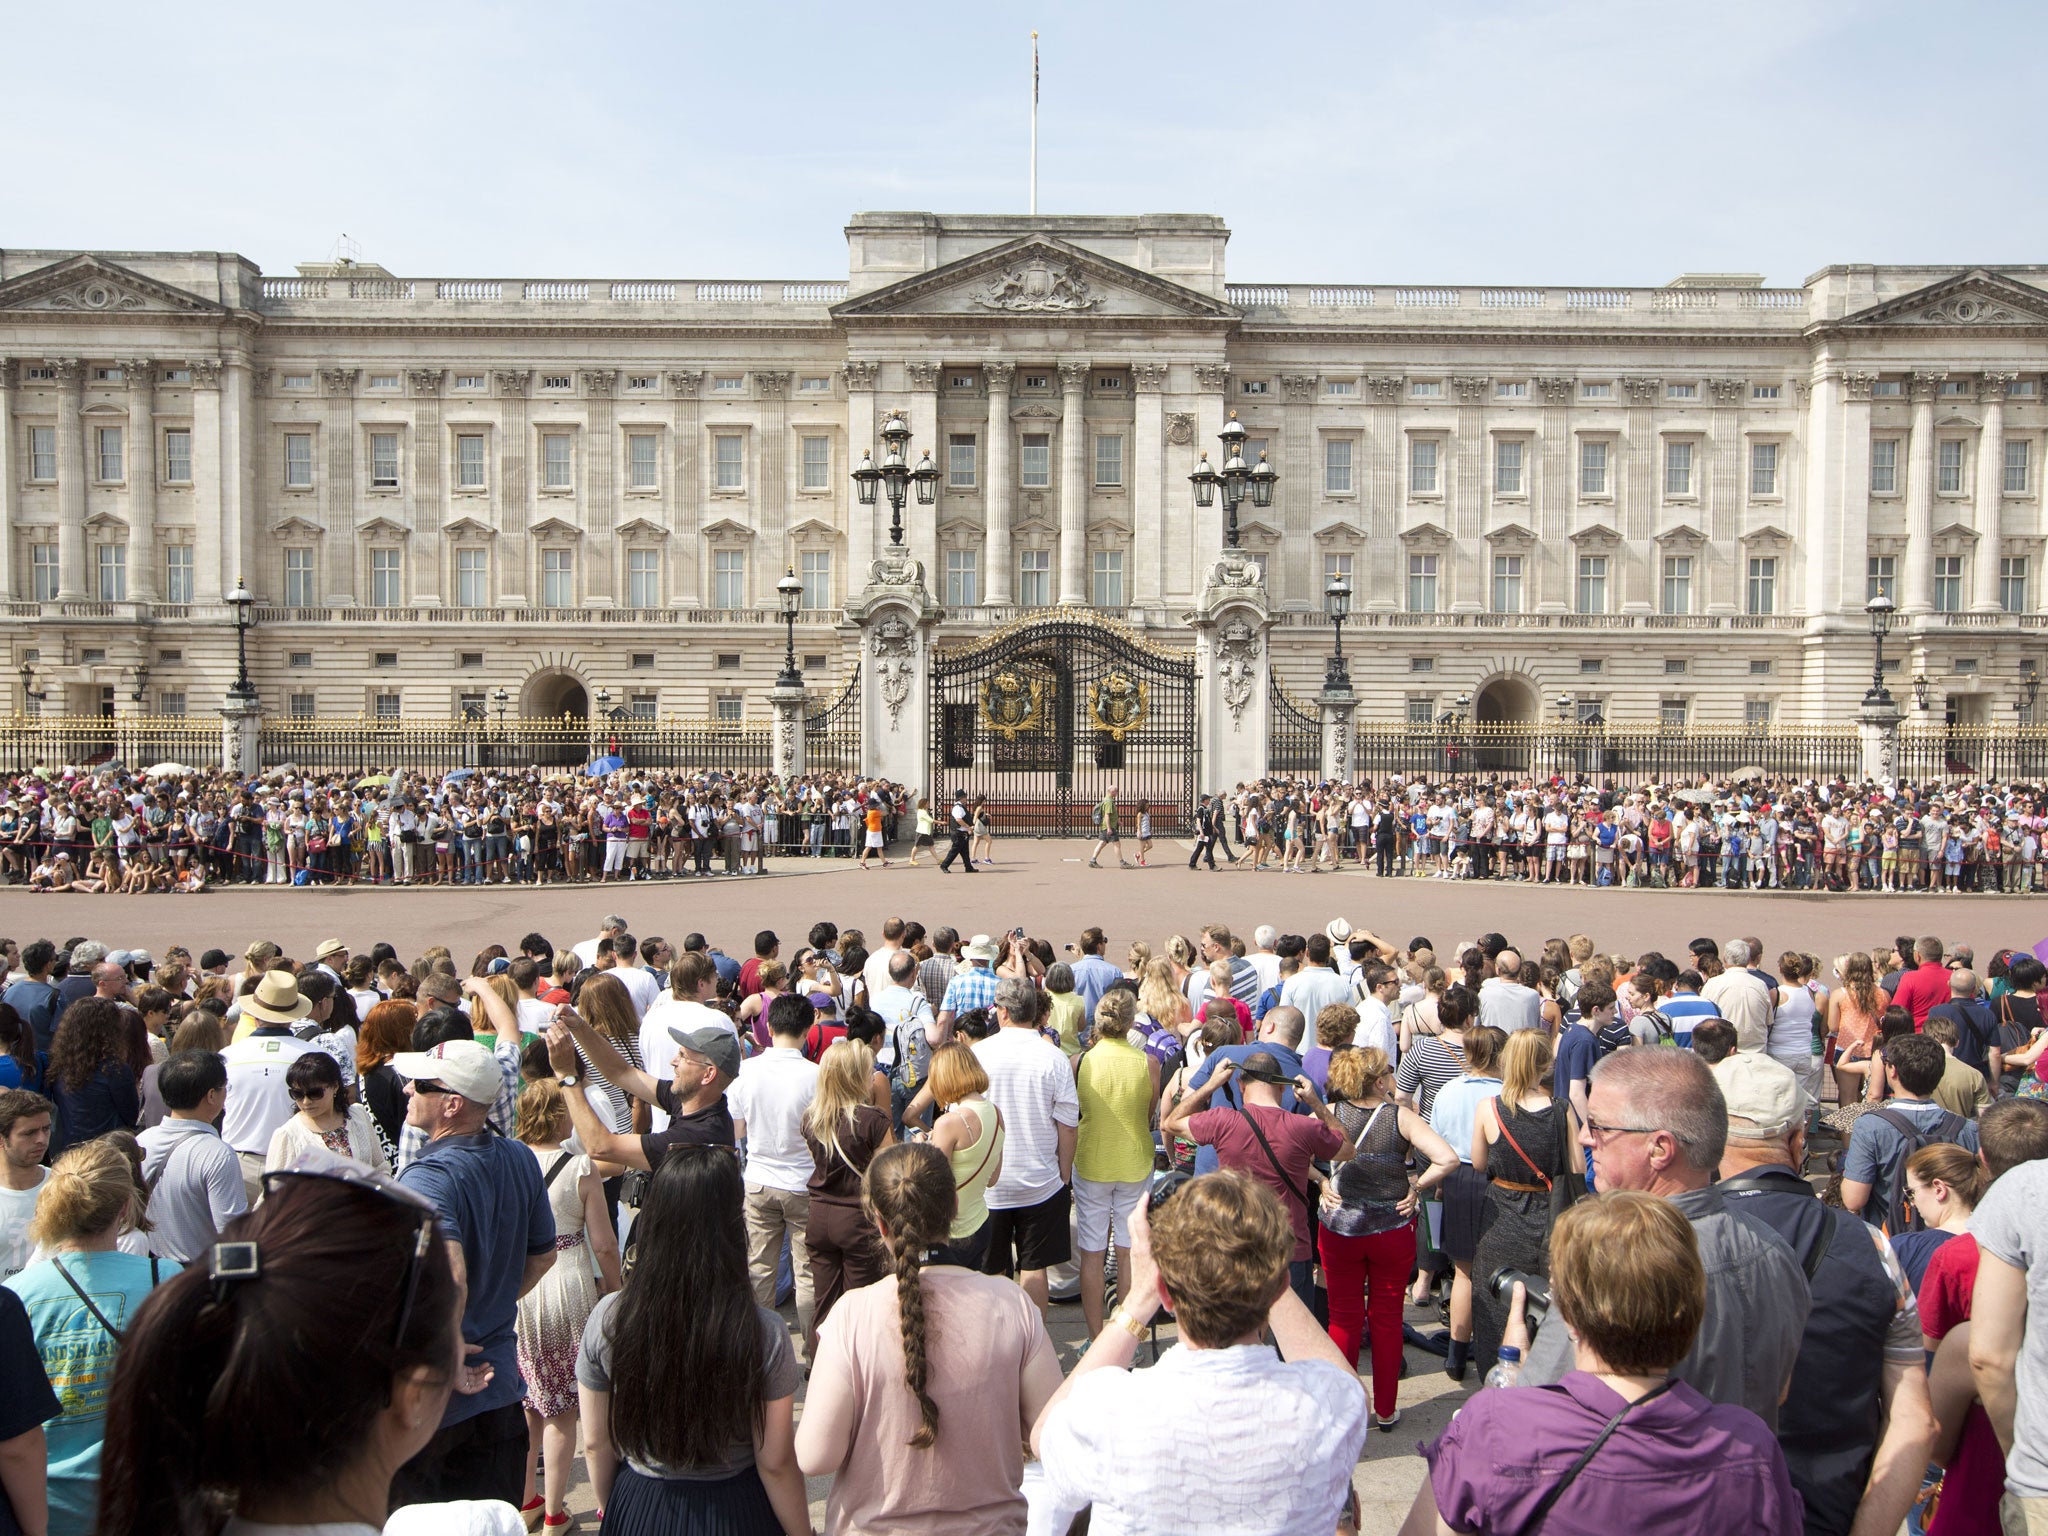 Buckingham Palace has just opened for summer visits but staff will be working on zero-hours contracts